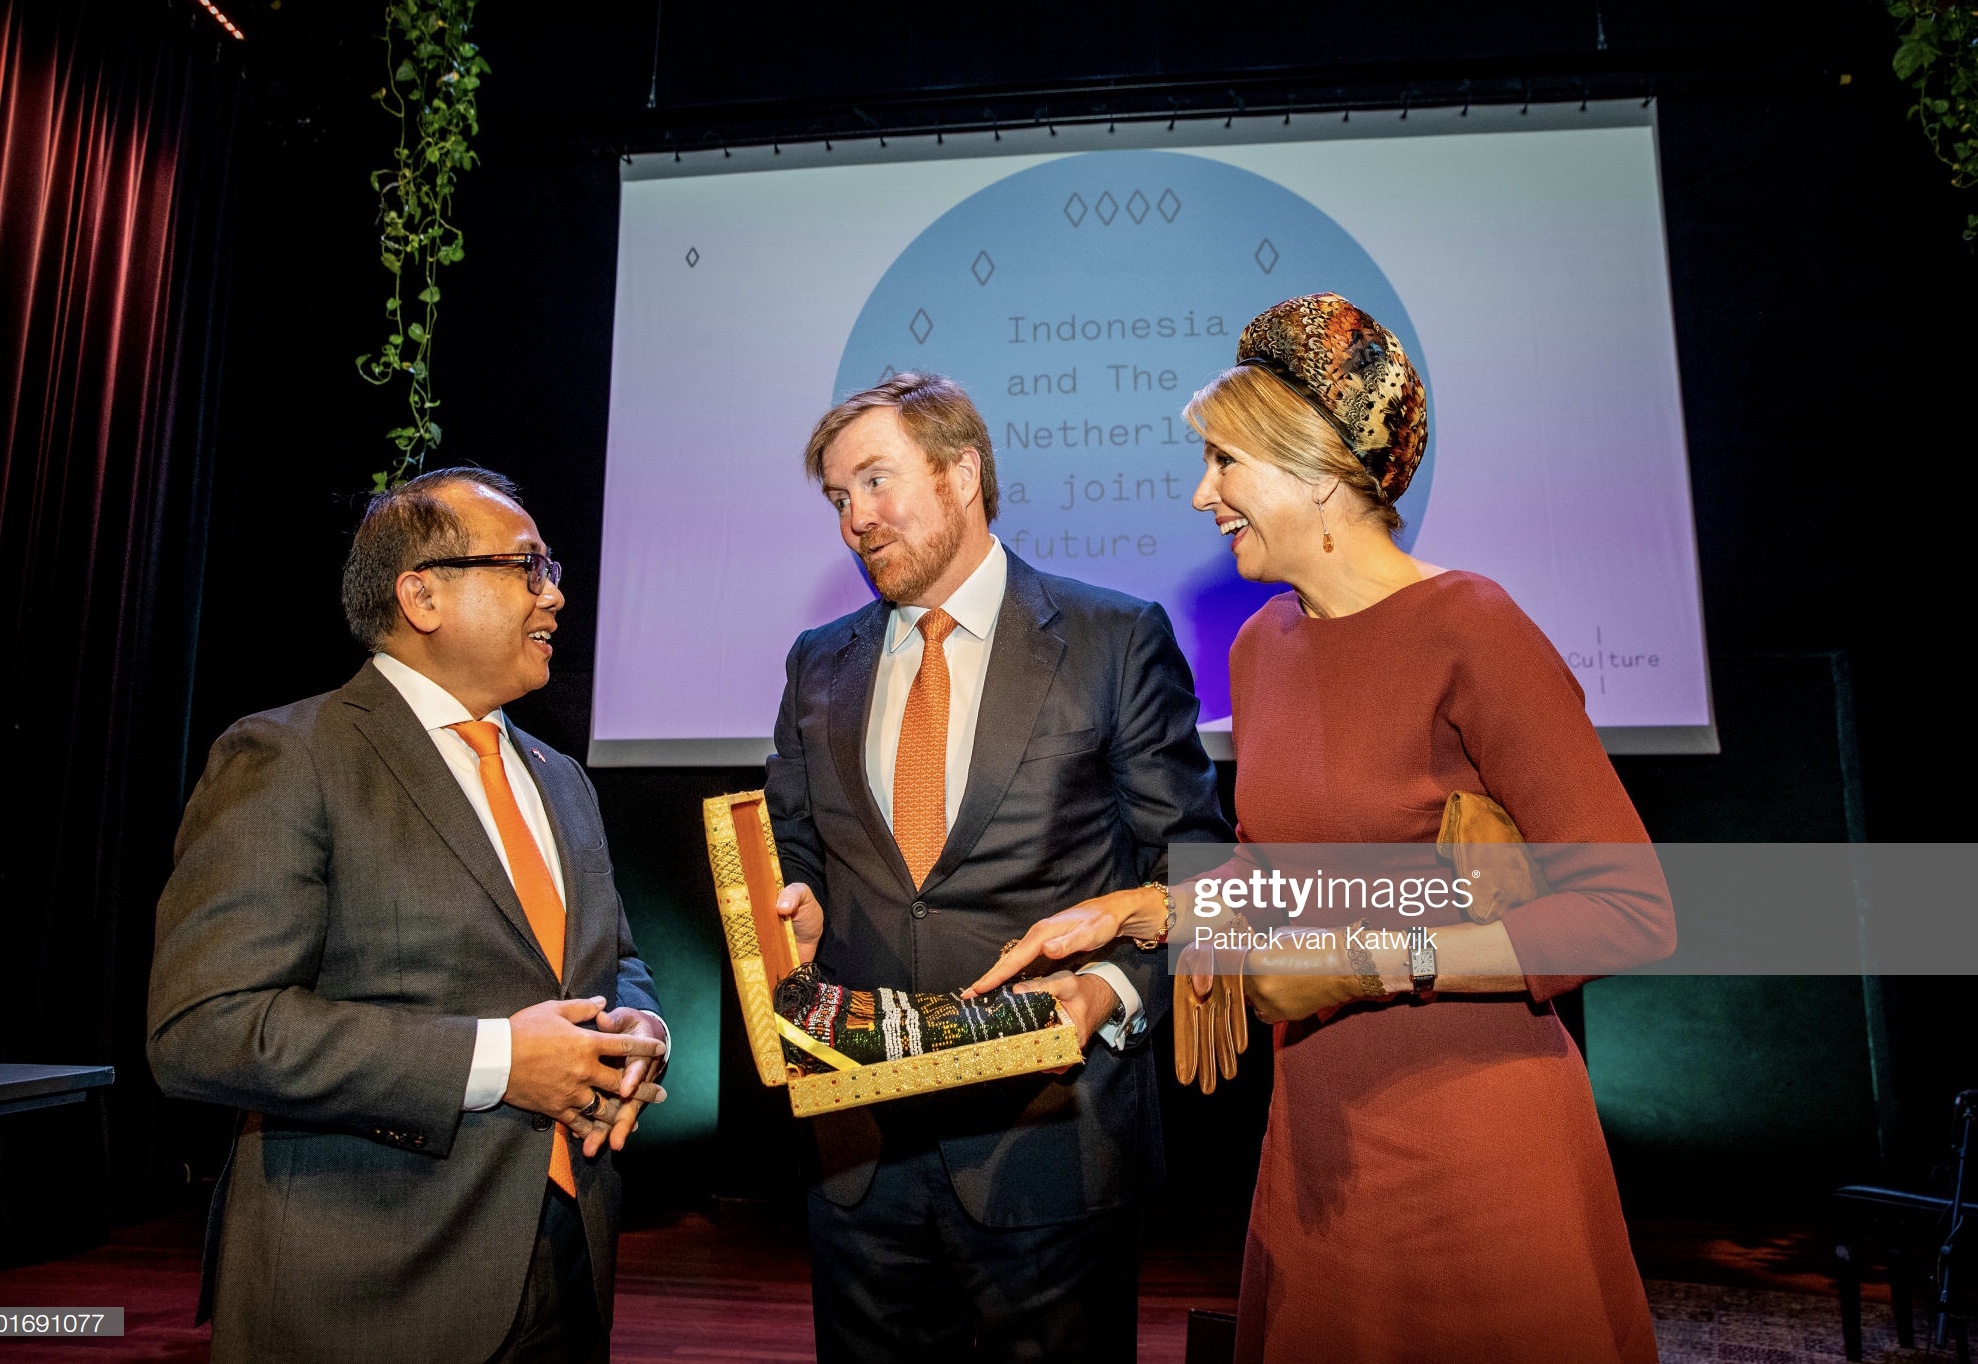 AMSTERDAM, NETHERLANDS - FEBRUARY 18: King Willem-Alexander of The Netherlands and Queen Maxima of The Netherlands attend the seminar Indonesia and the Netherlands: A joint Future on February 18, 2020 in Amsterdam, Netherlands. The seminar is an event prior the State visit of King Willem-Alexander and Queen Maxima in March.  (Photo by Patrick van Katwijk/WireImage )